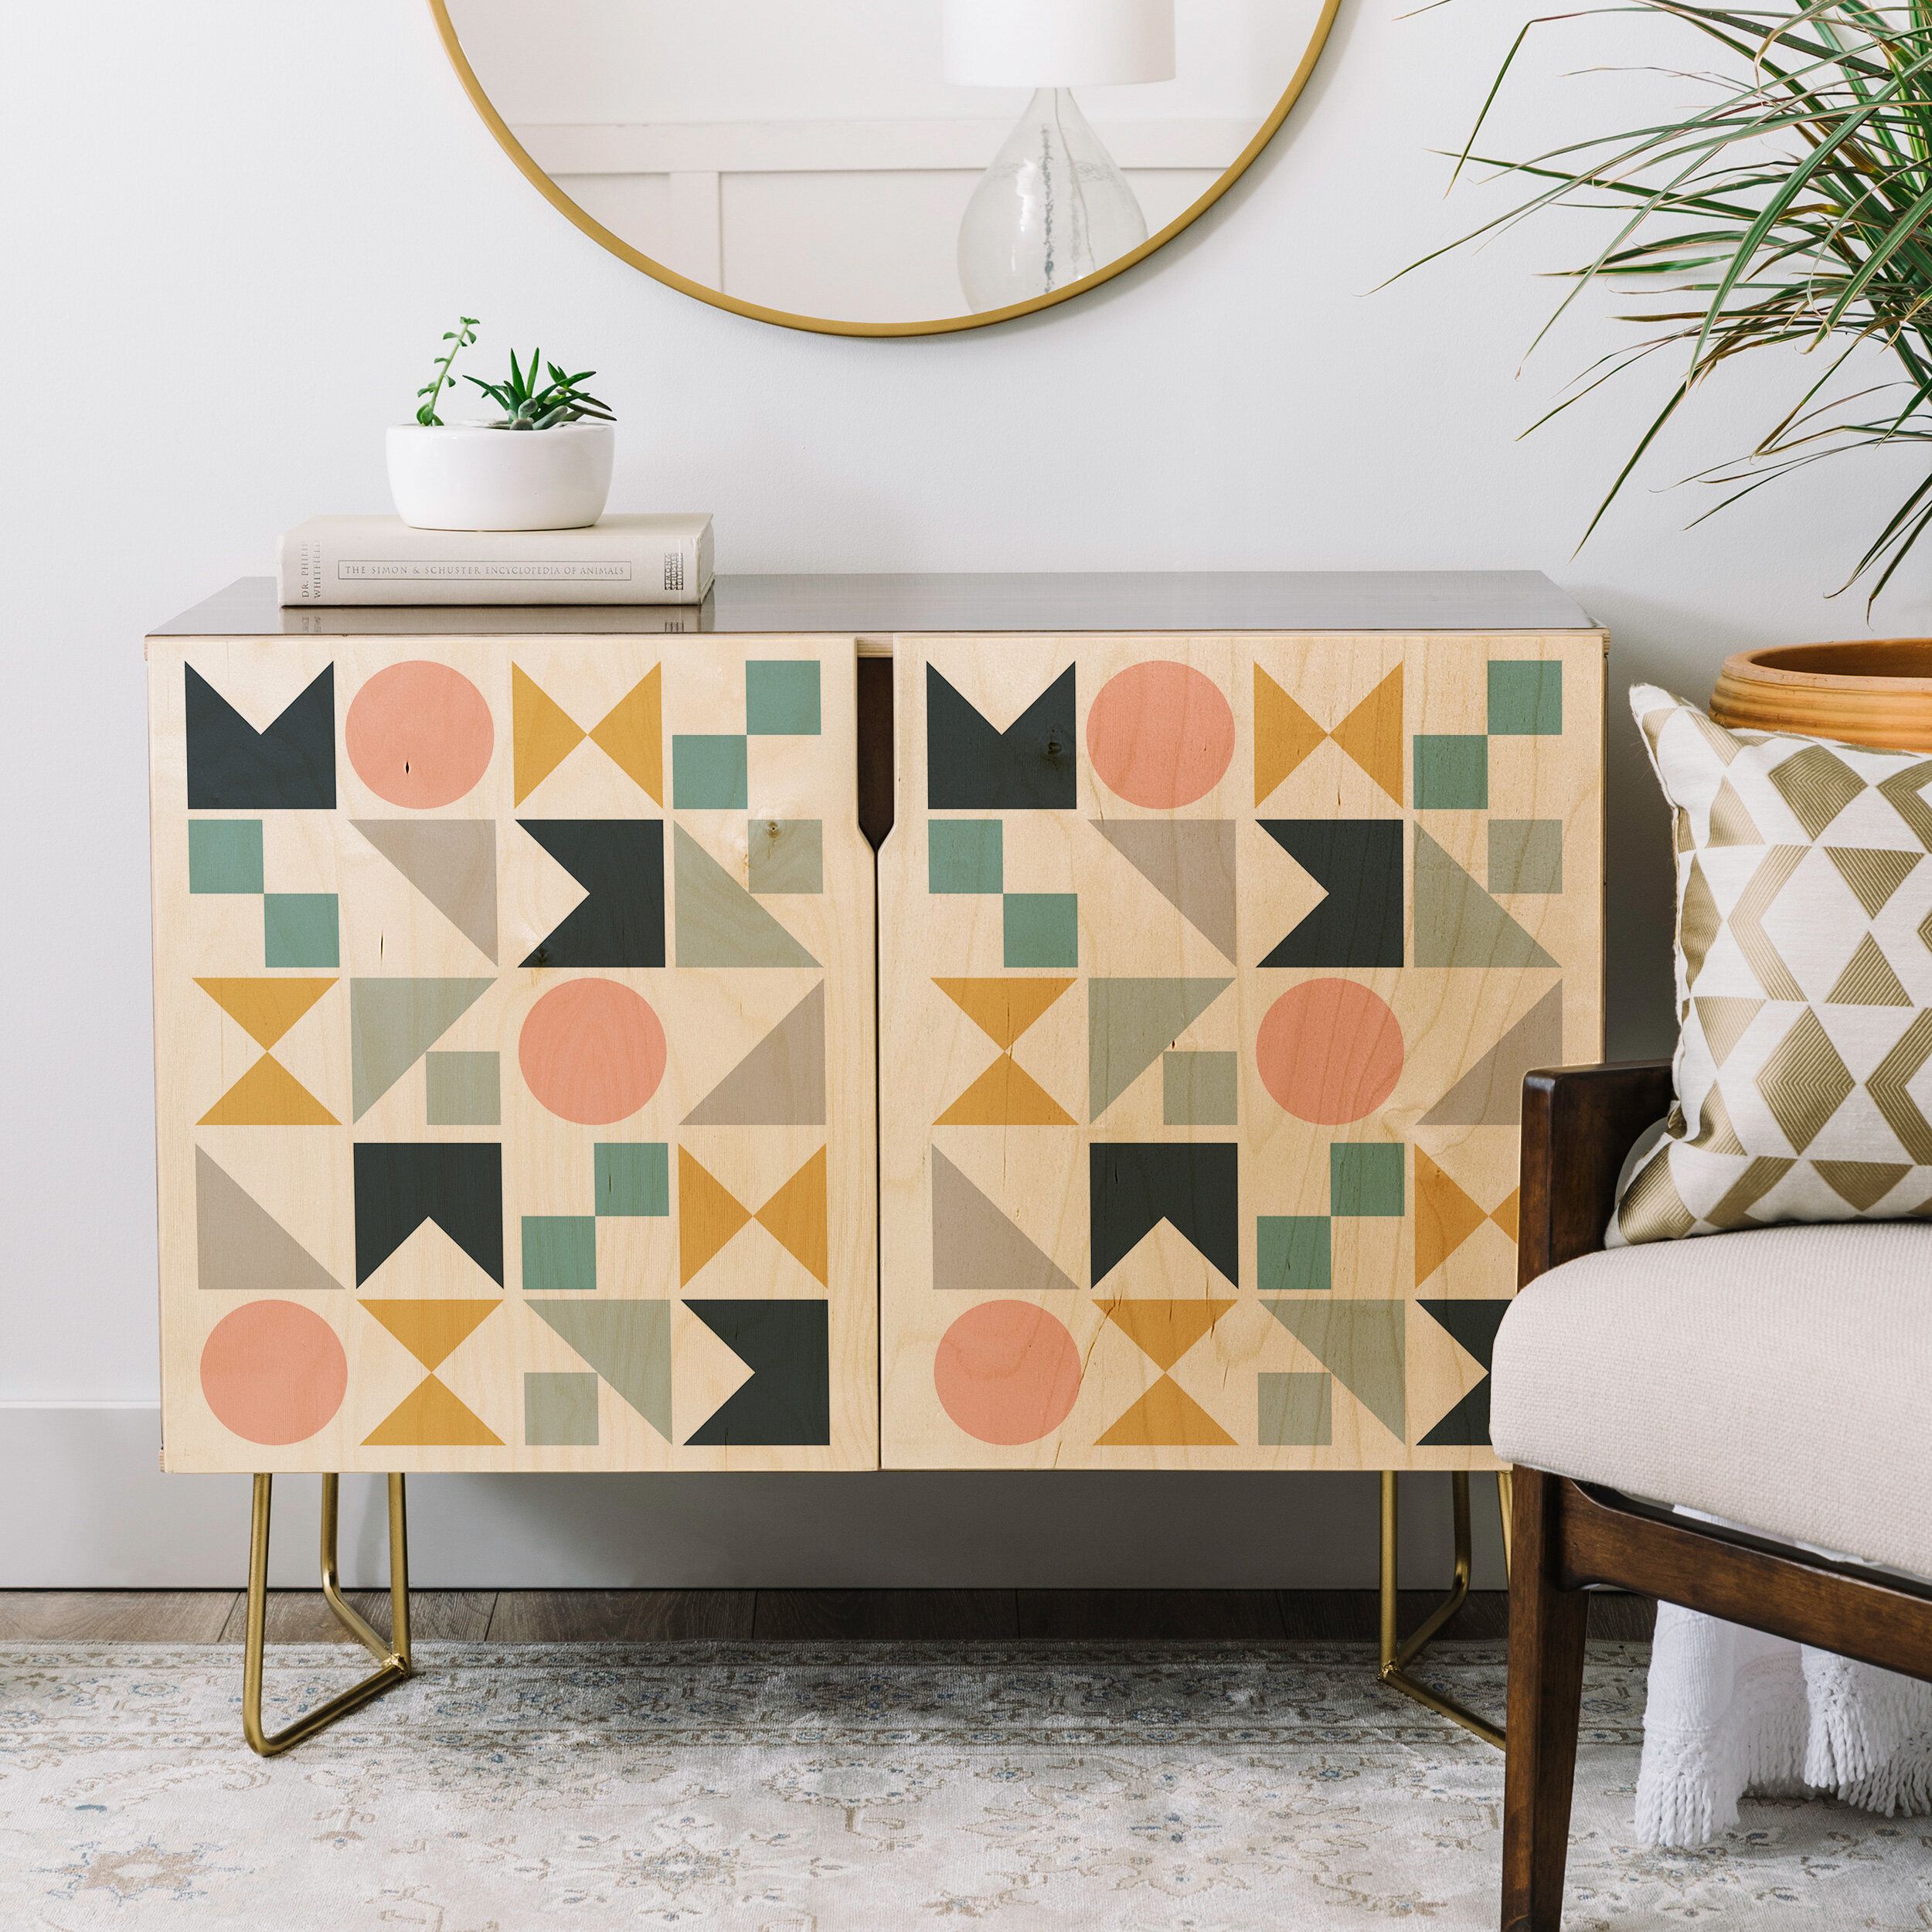 The Best Multi Colored Geometric Shapes Credenzas